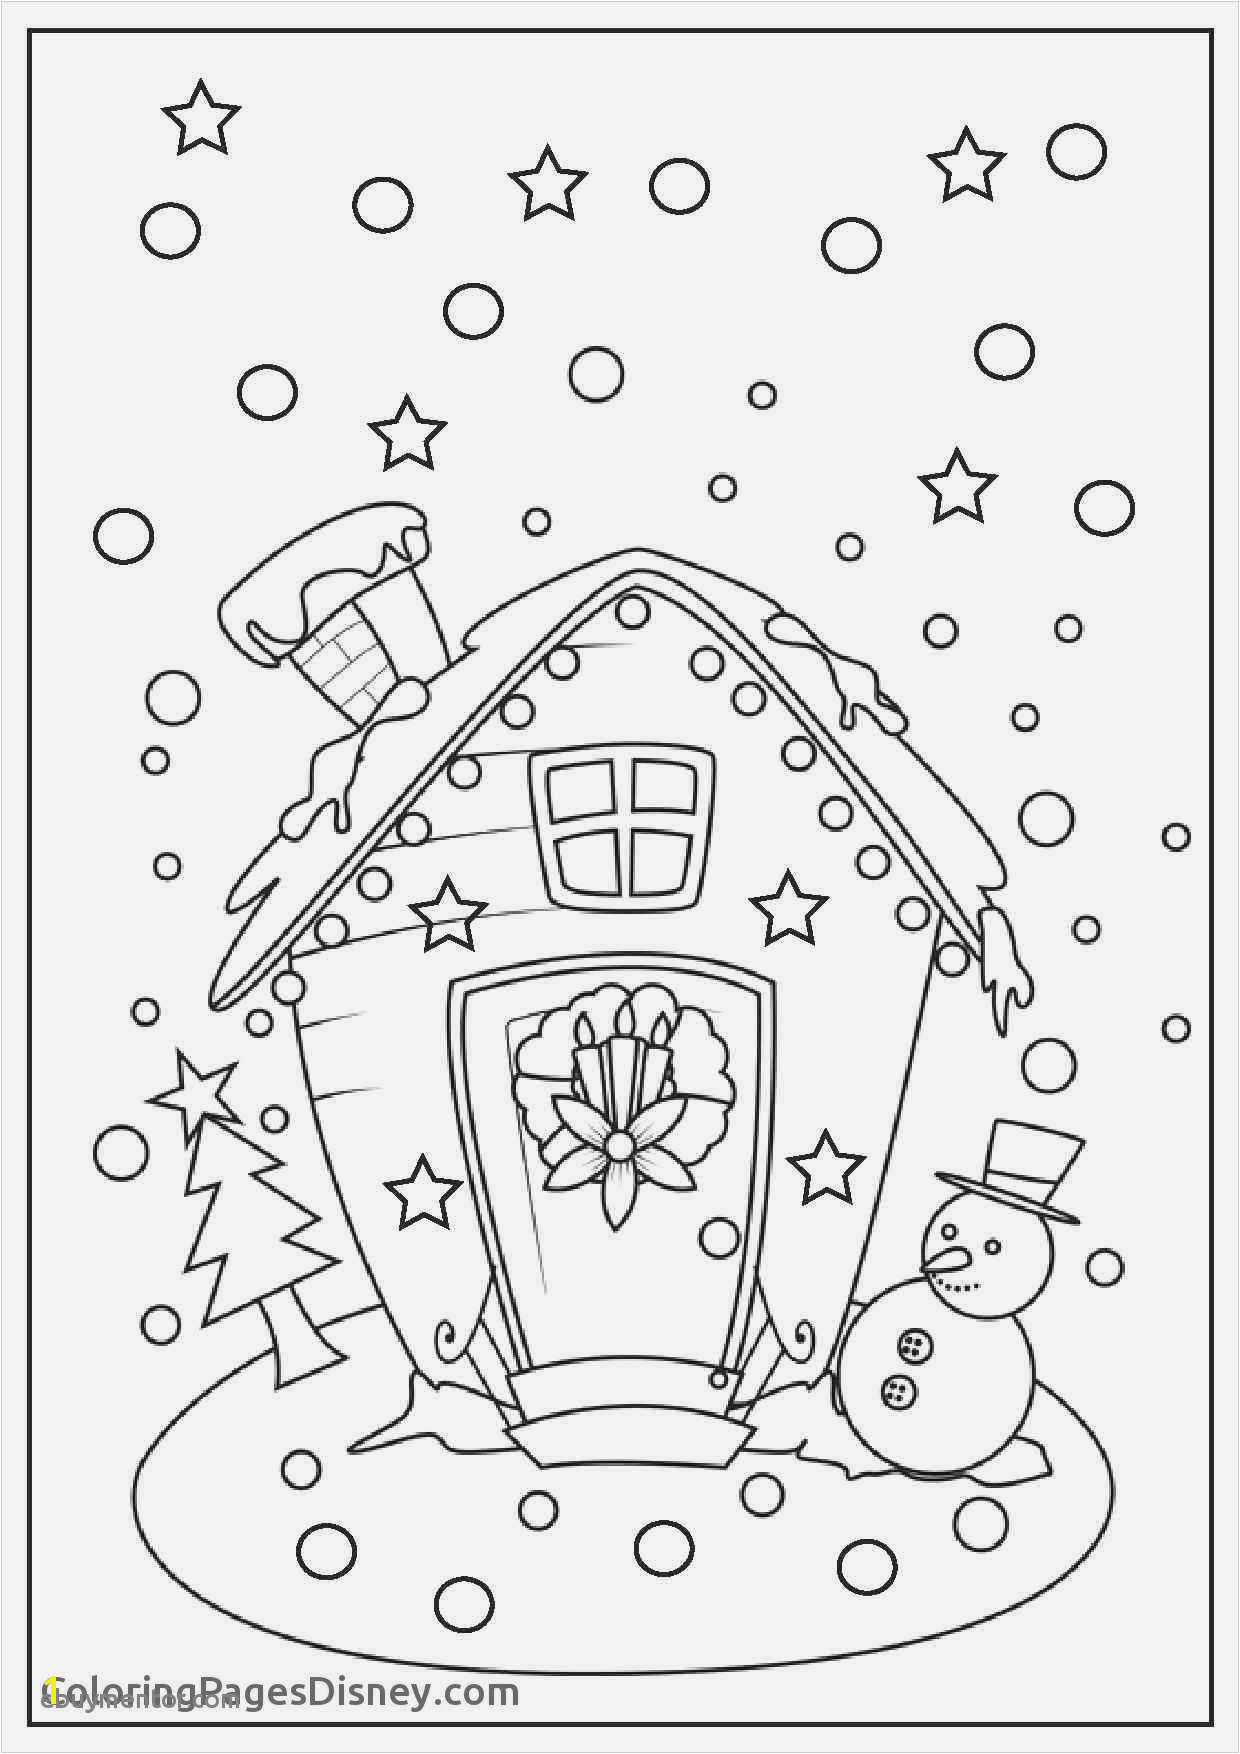 Free Christmas Coloring Pages for Kids Cool Coloring Printables 0d Inspiration Von Weihnachten österreich 2018